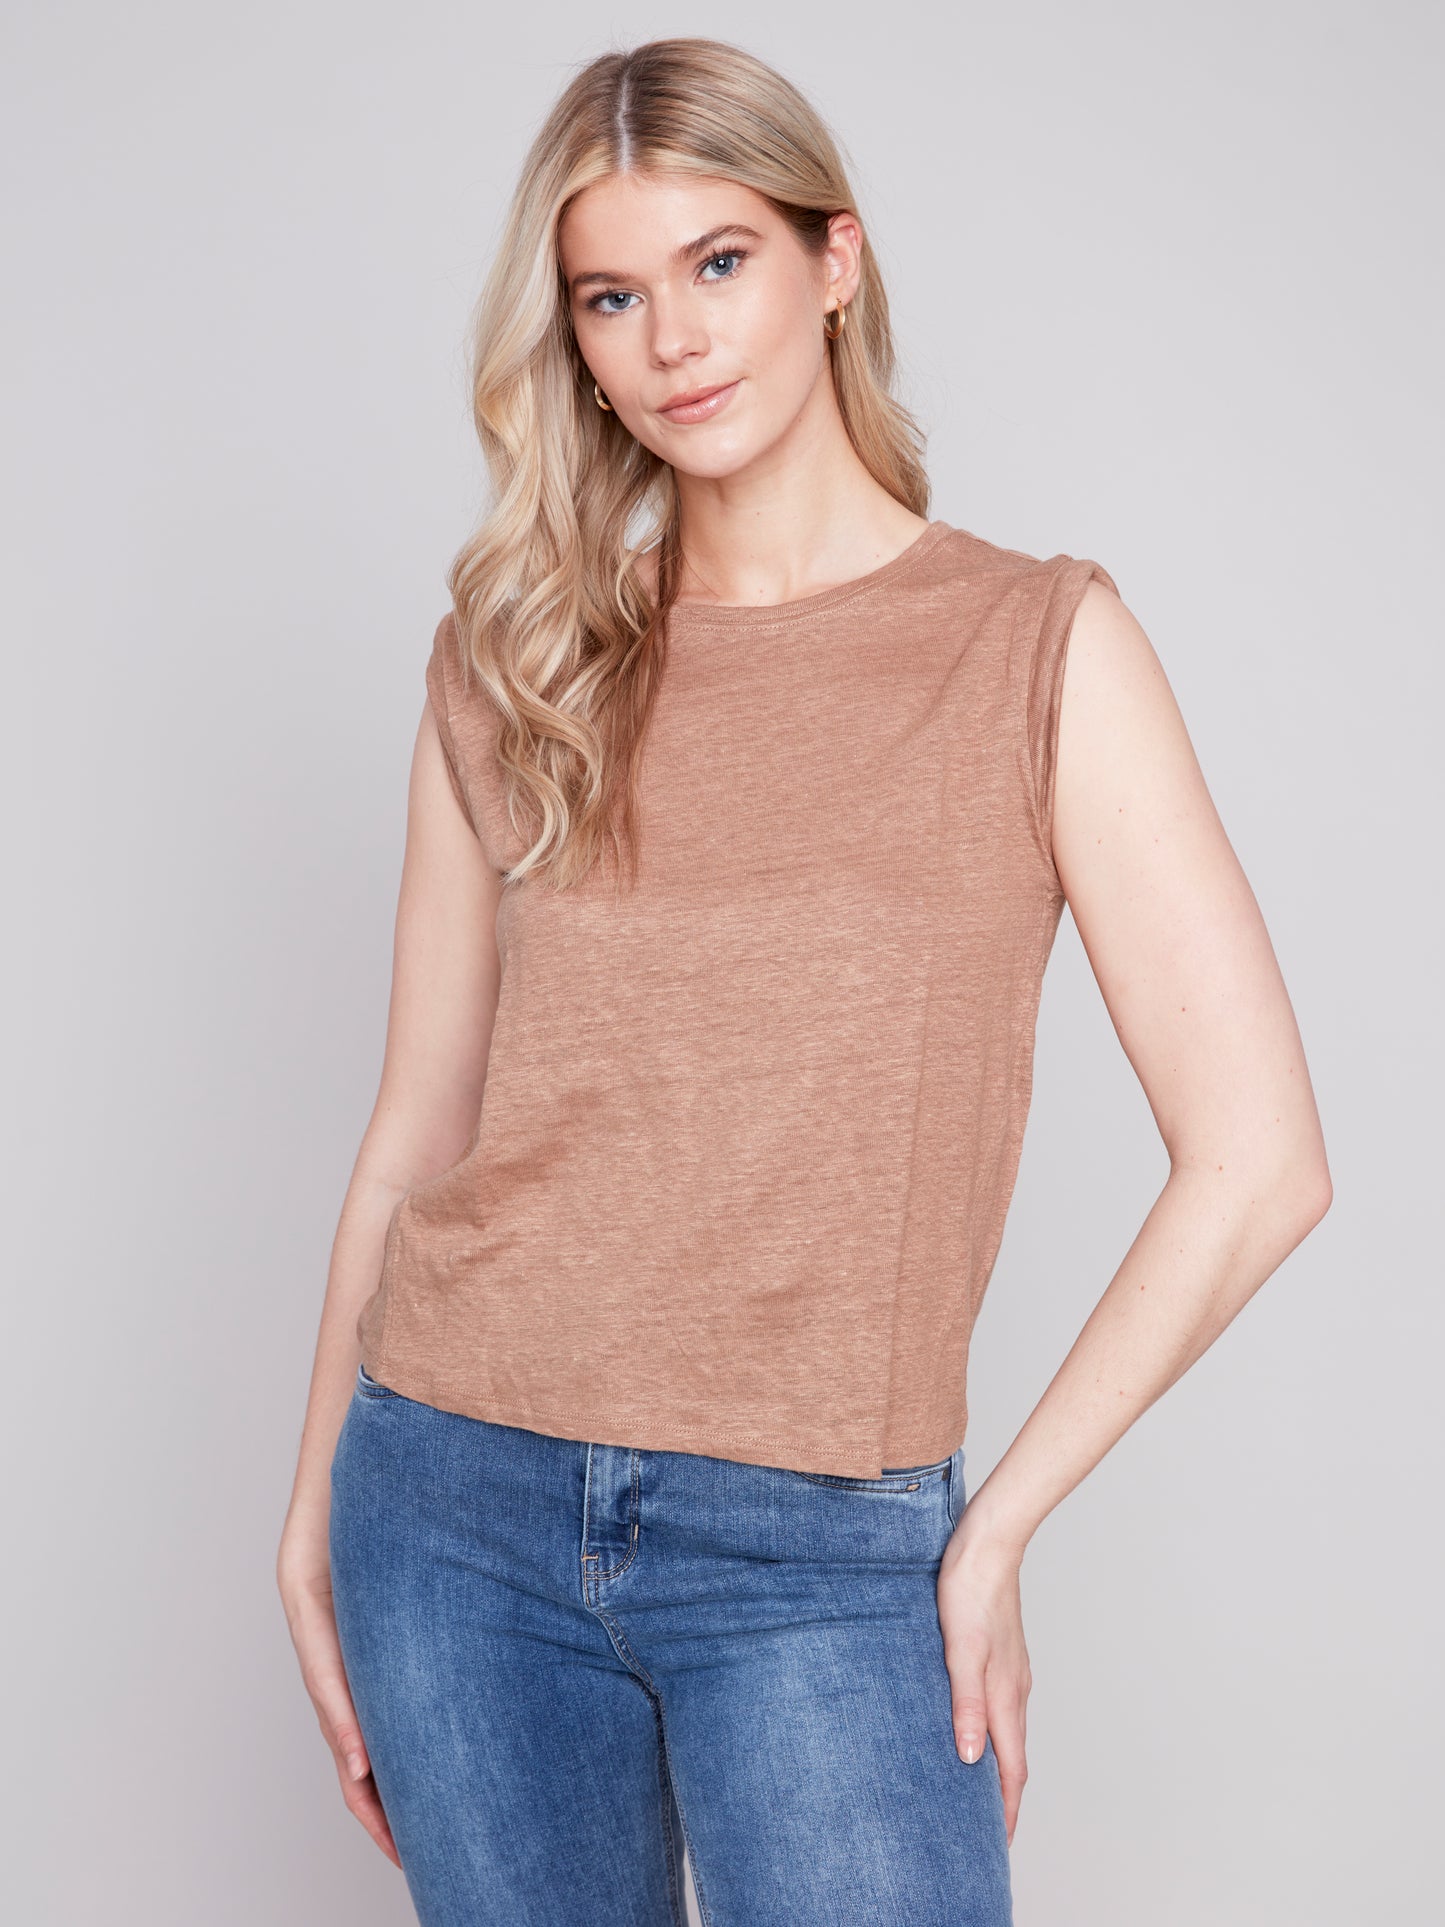 The model is wearing a Caramel Sleeveless Linen Tank by Charlie B and jeans.